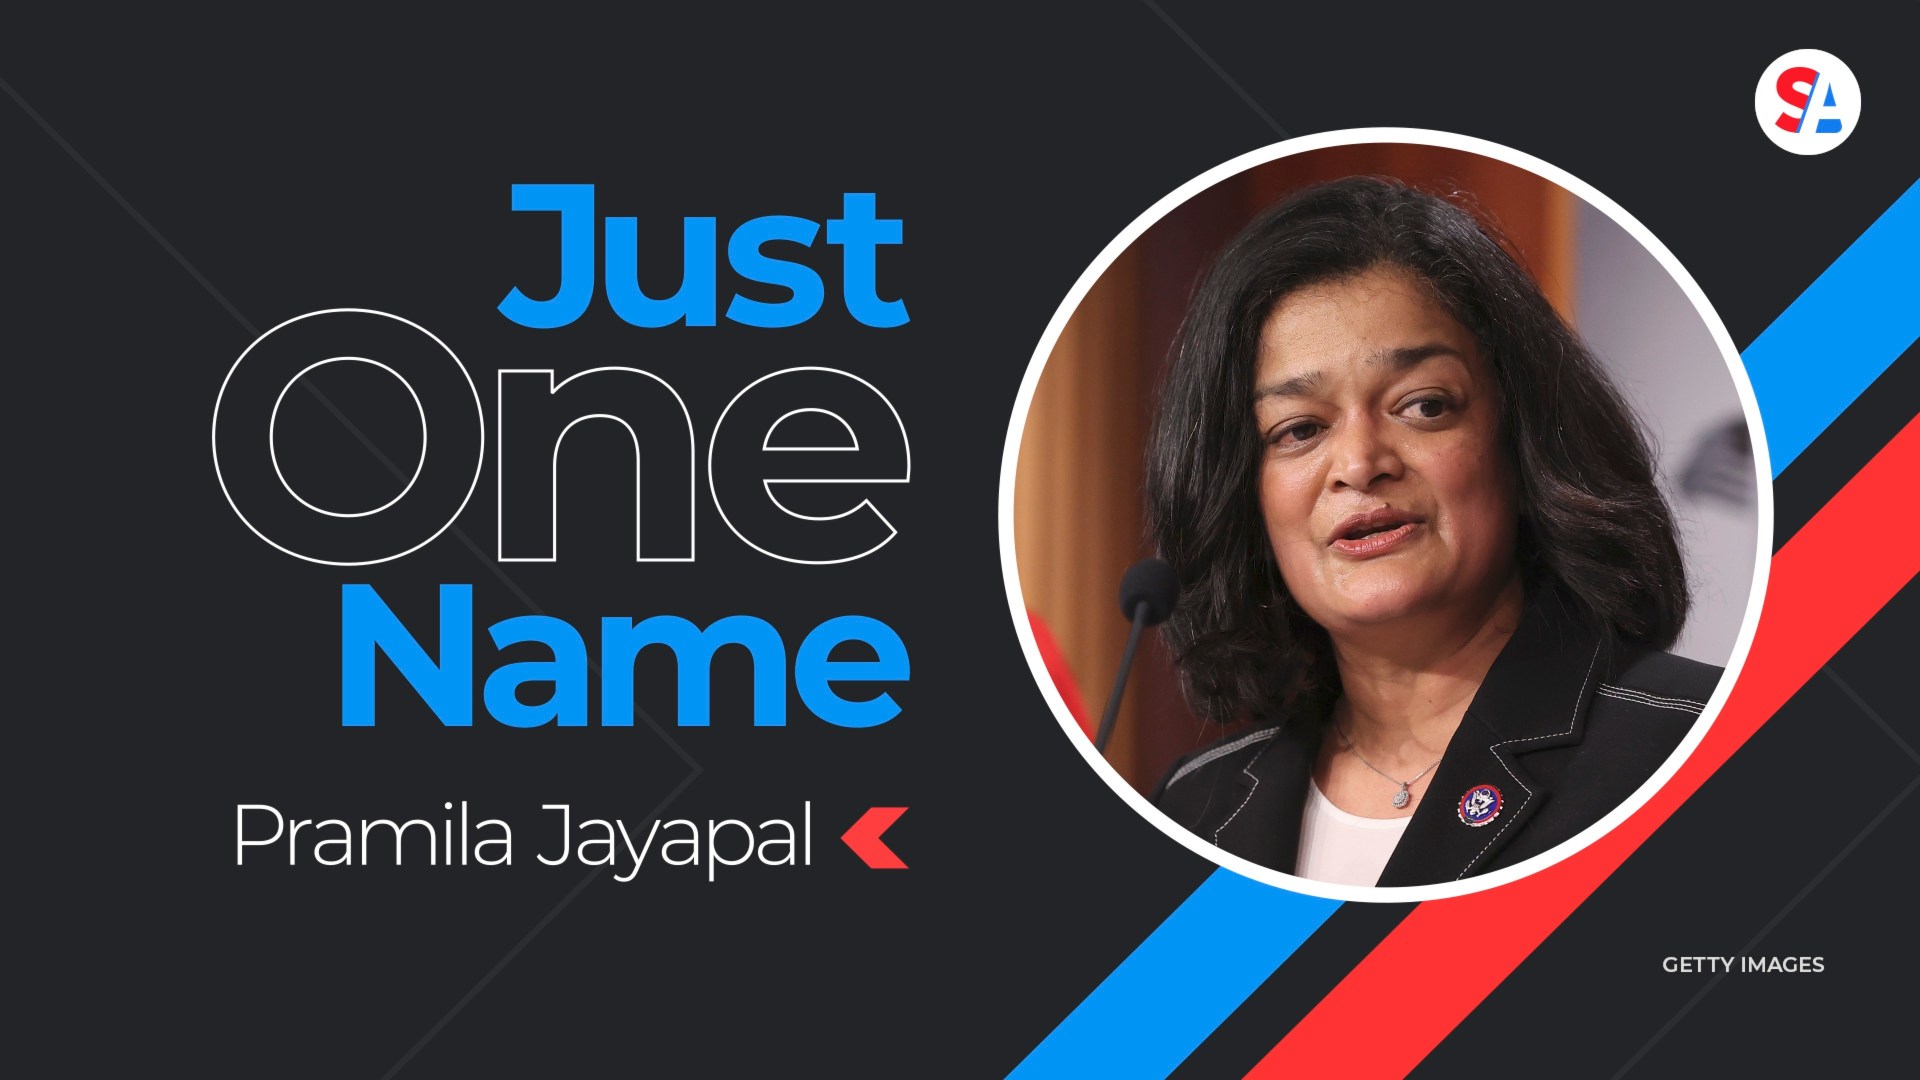 As Progressive Caucus Chair Pramila Jayapal works to pull Democrats together to pass legislation, the question is: can she succeed?